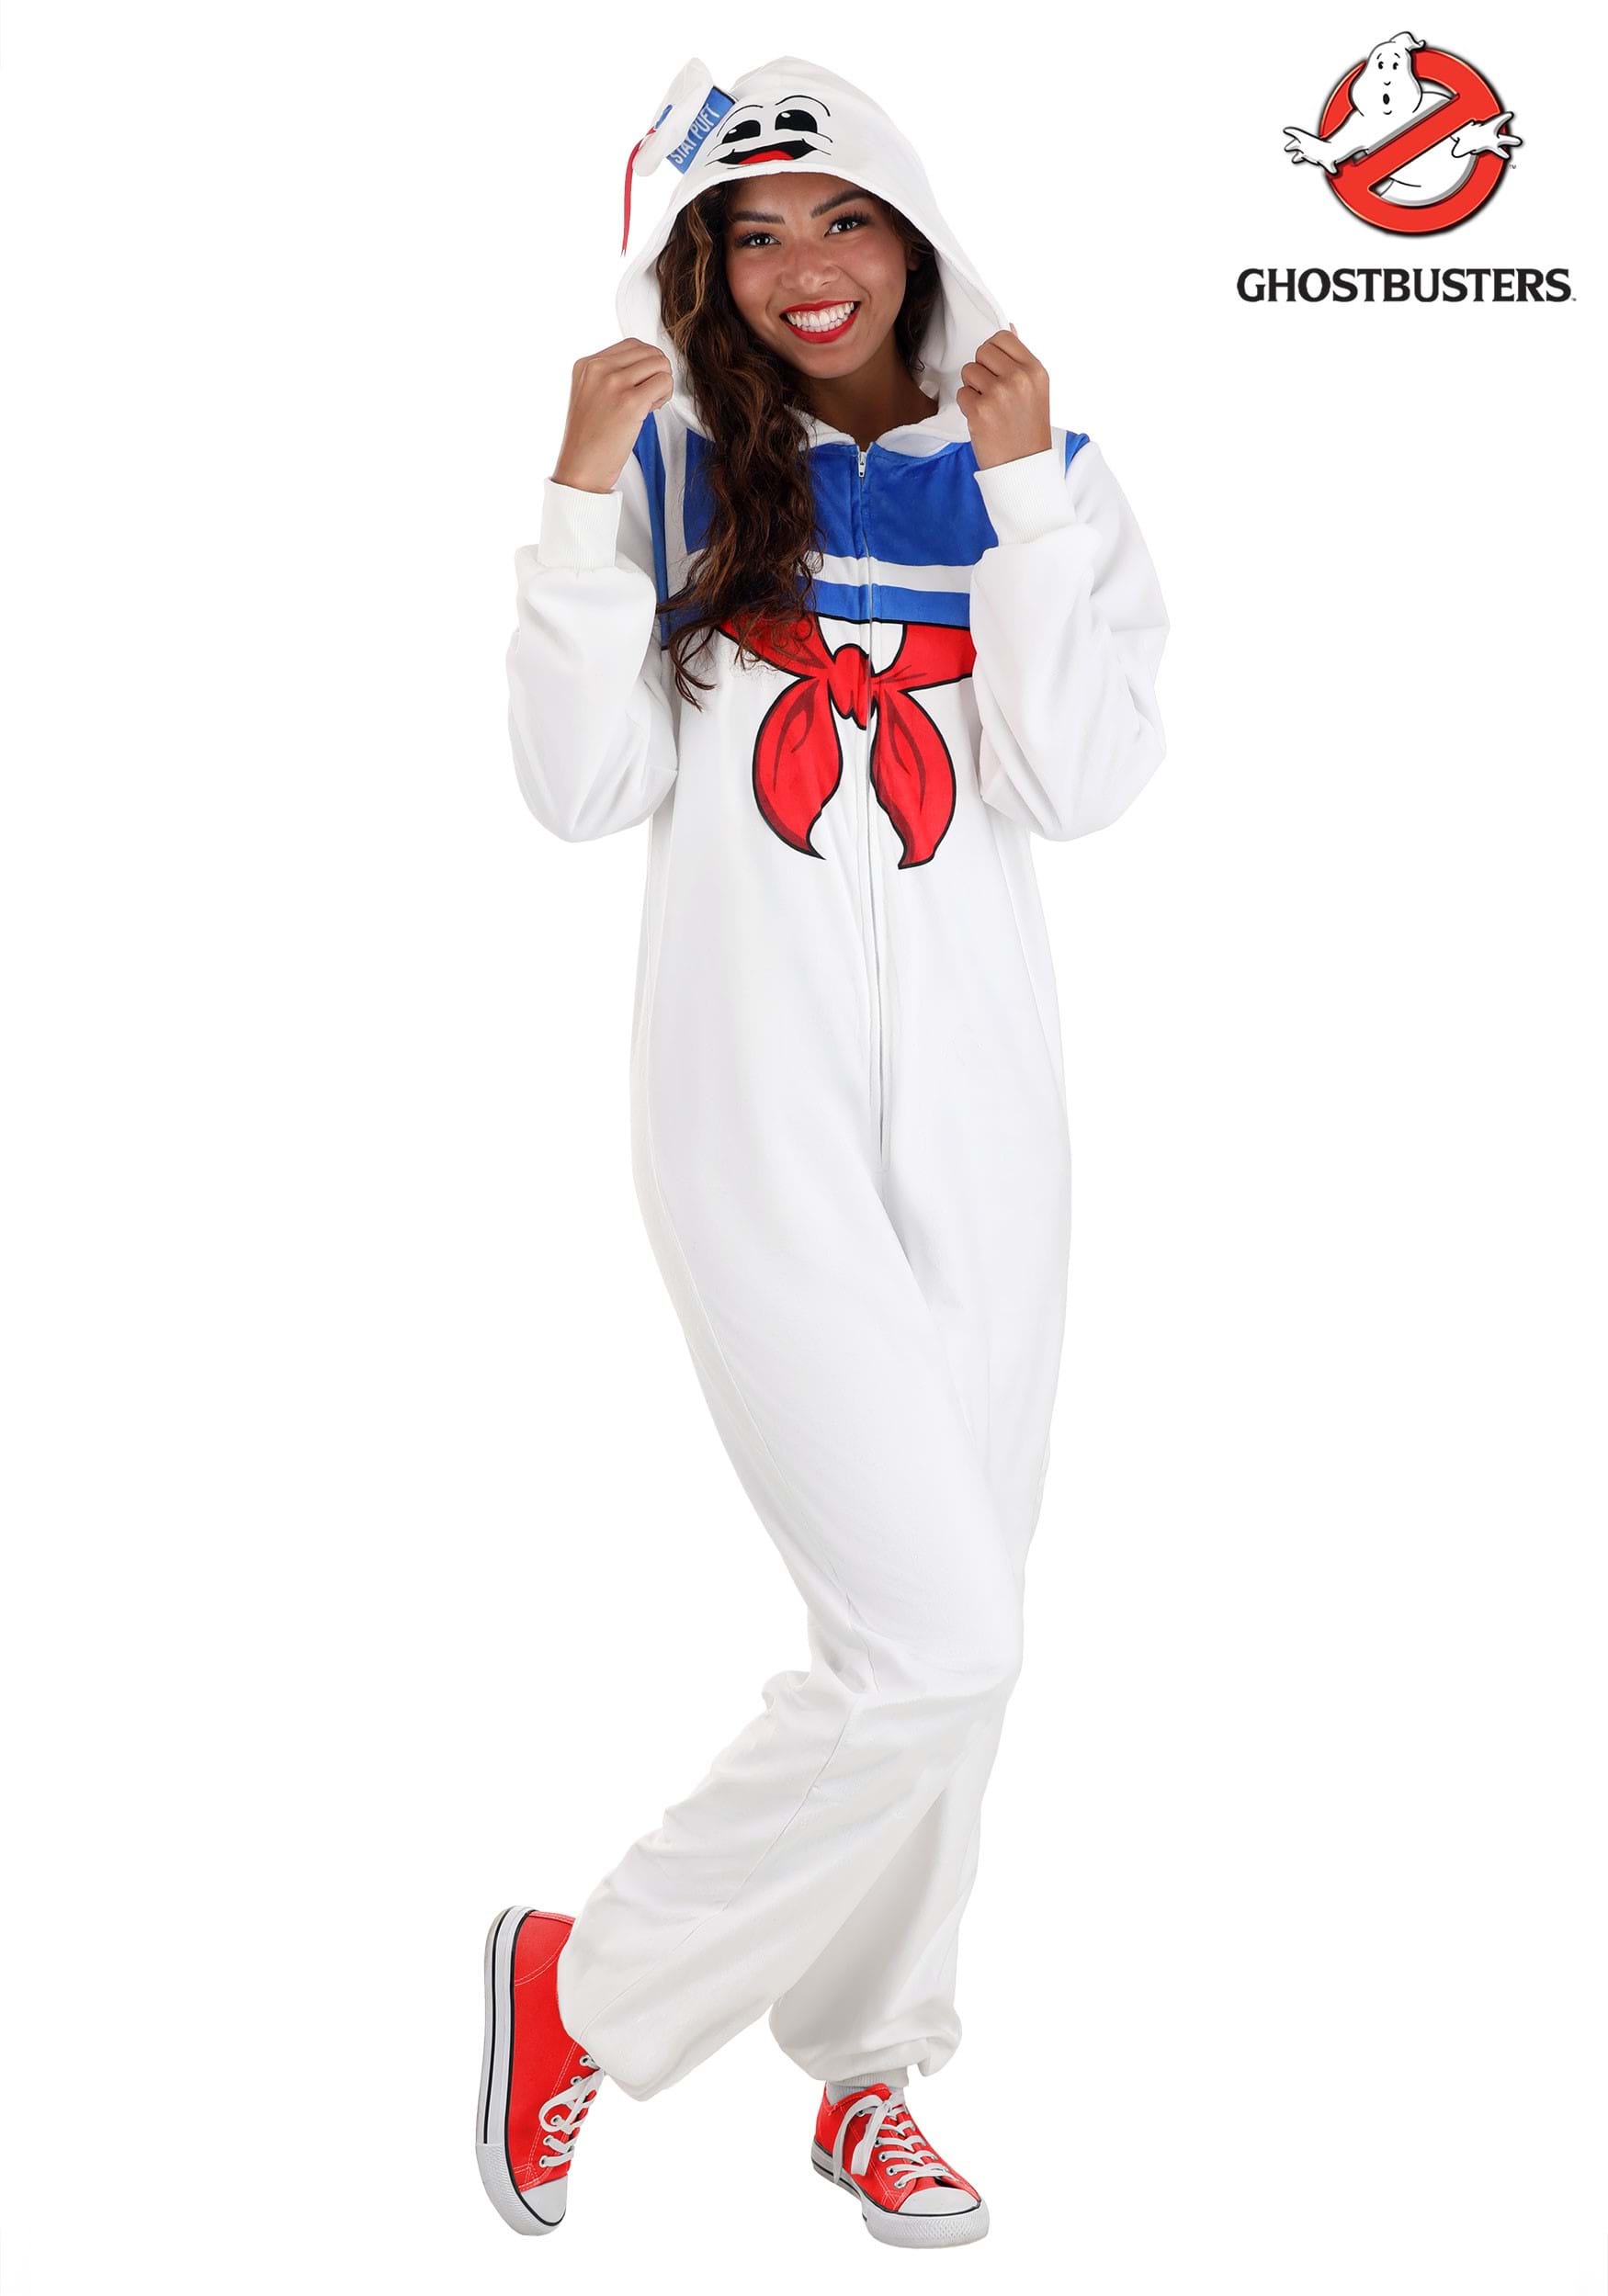 Stay Puft Marshmallow Man Costume Onesie for Adults